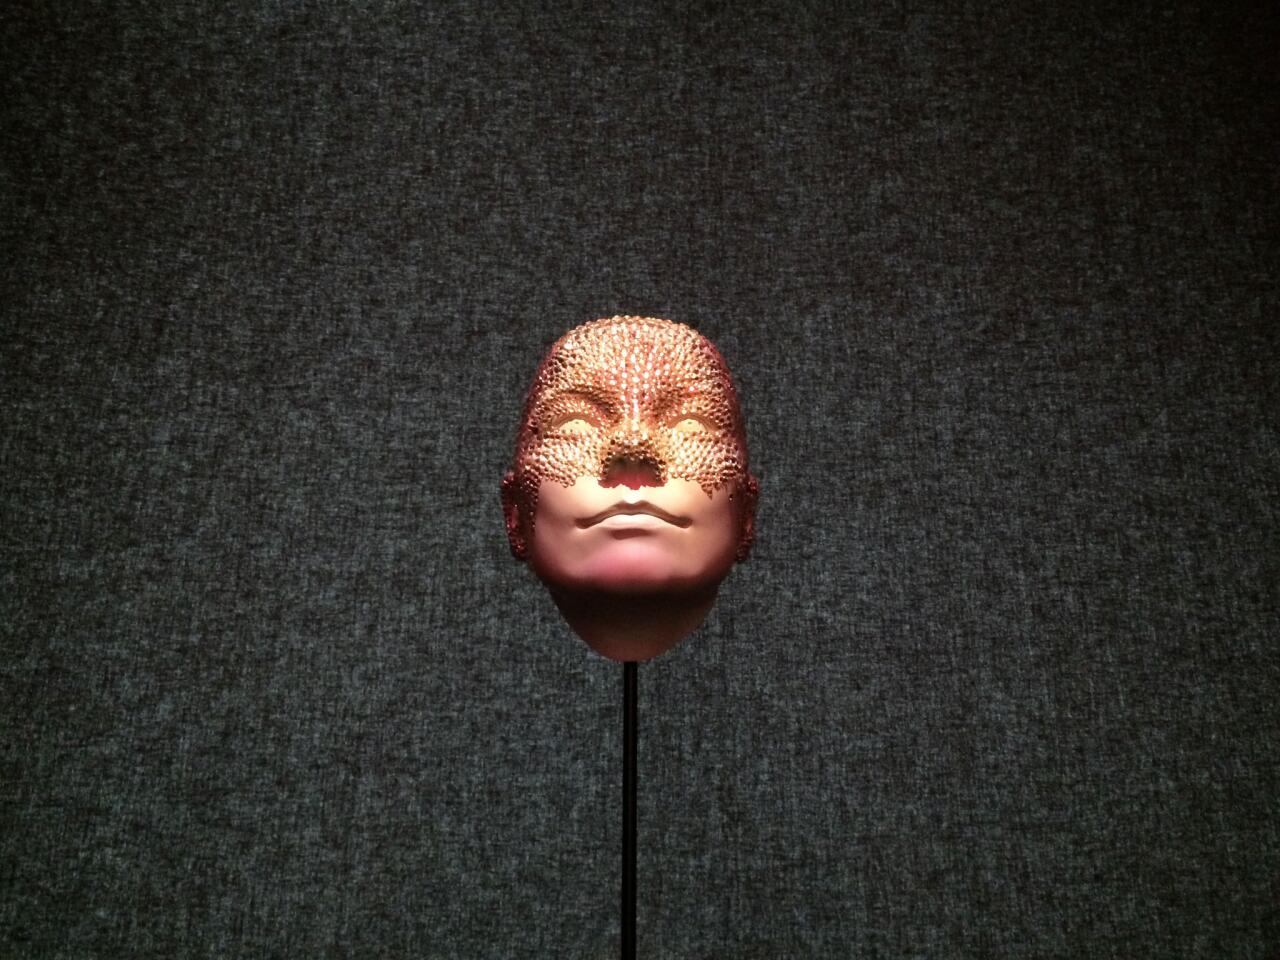 MoMA's Björk retrospective was a critical dud, but the installations were highly photogenic -- which means the museum can console itself with some excellent Instagrams. Seen here: a Swarovski crystal mask designed by Val Garland, which was re-created for the show.